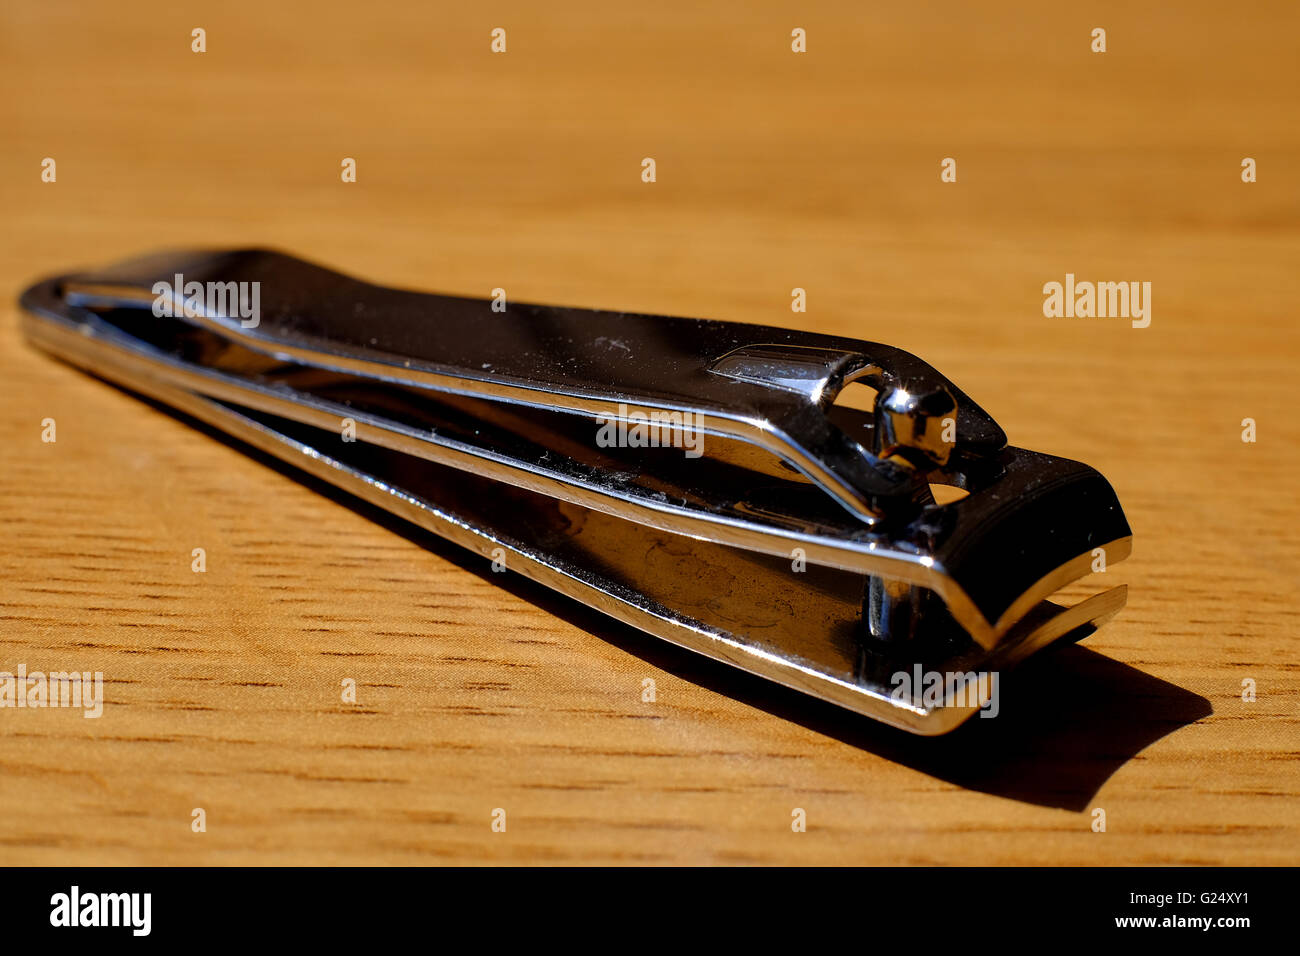 A nail clipper on a wooden table Stock Photo